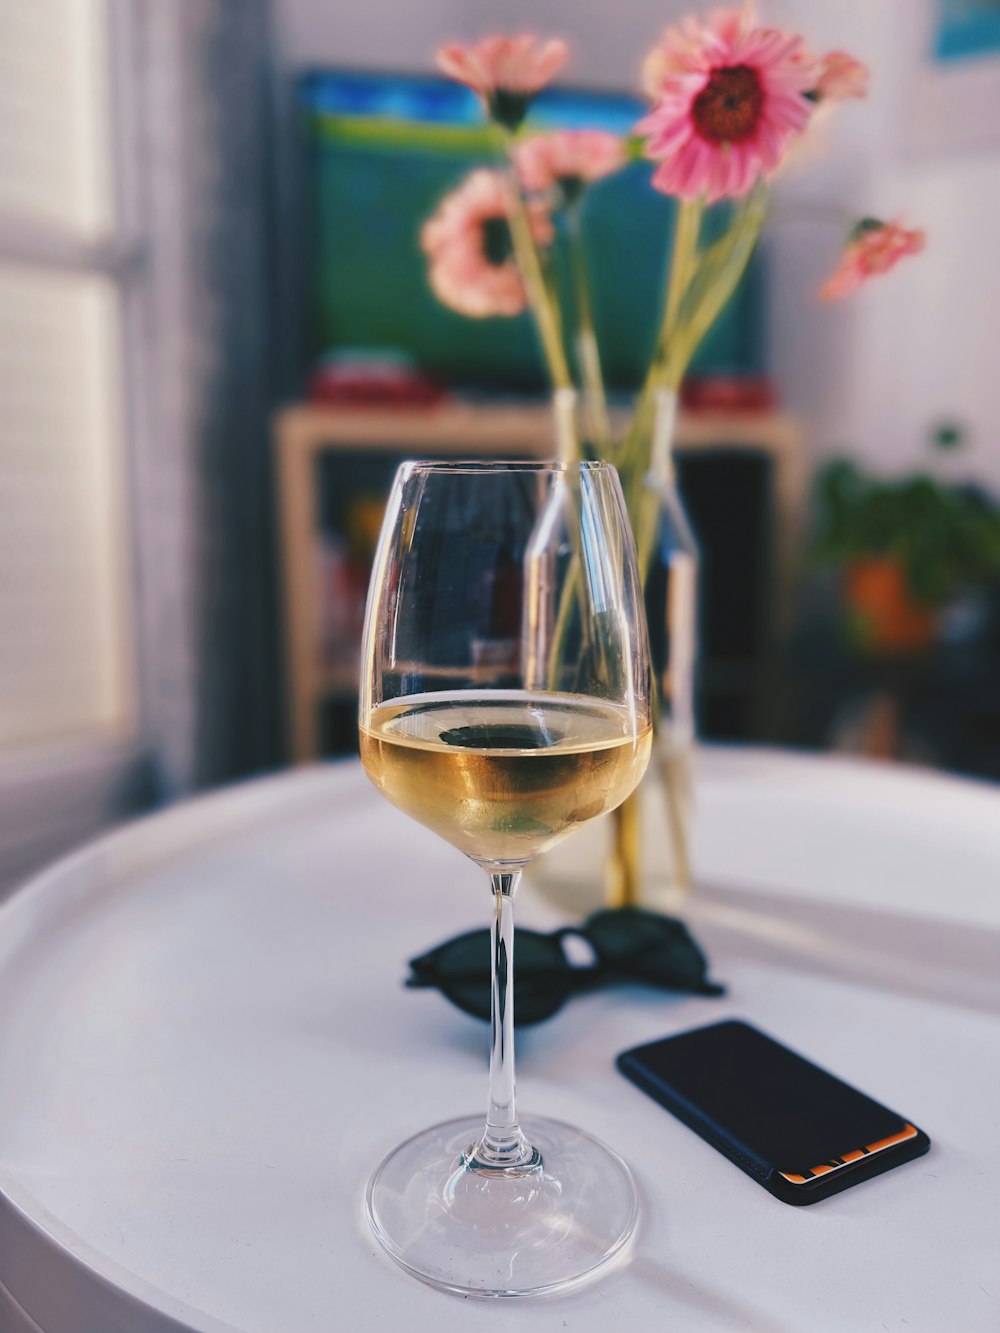 a glass of wine next to a cell phone and a vase of flowers